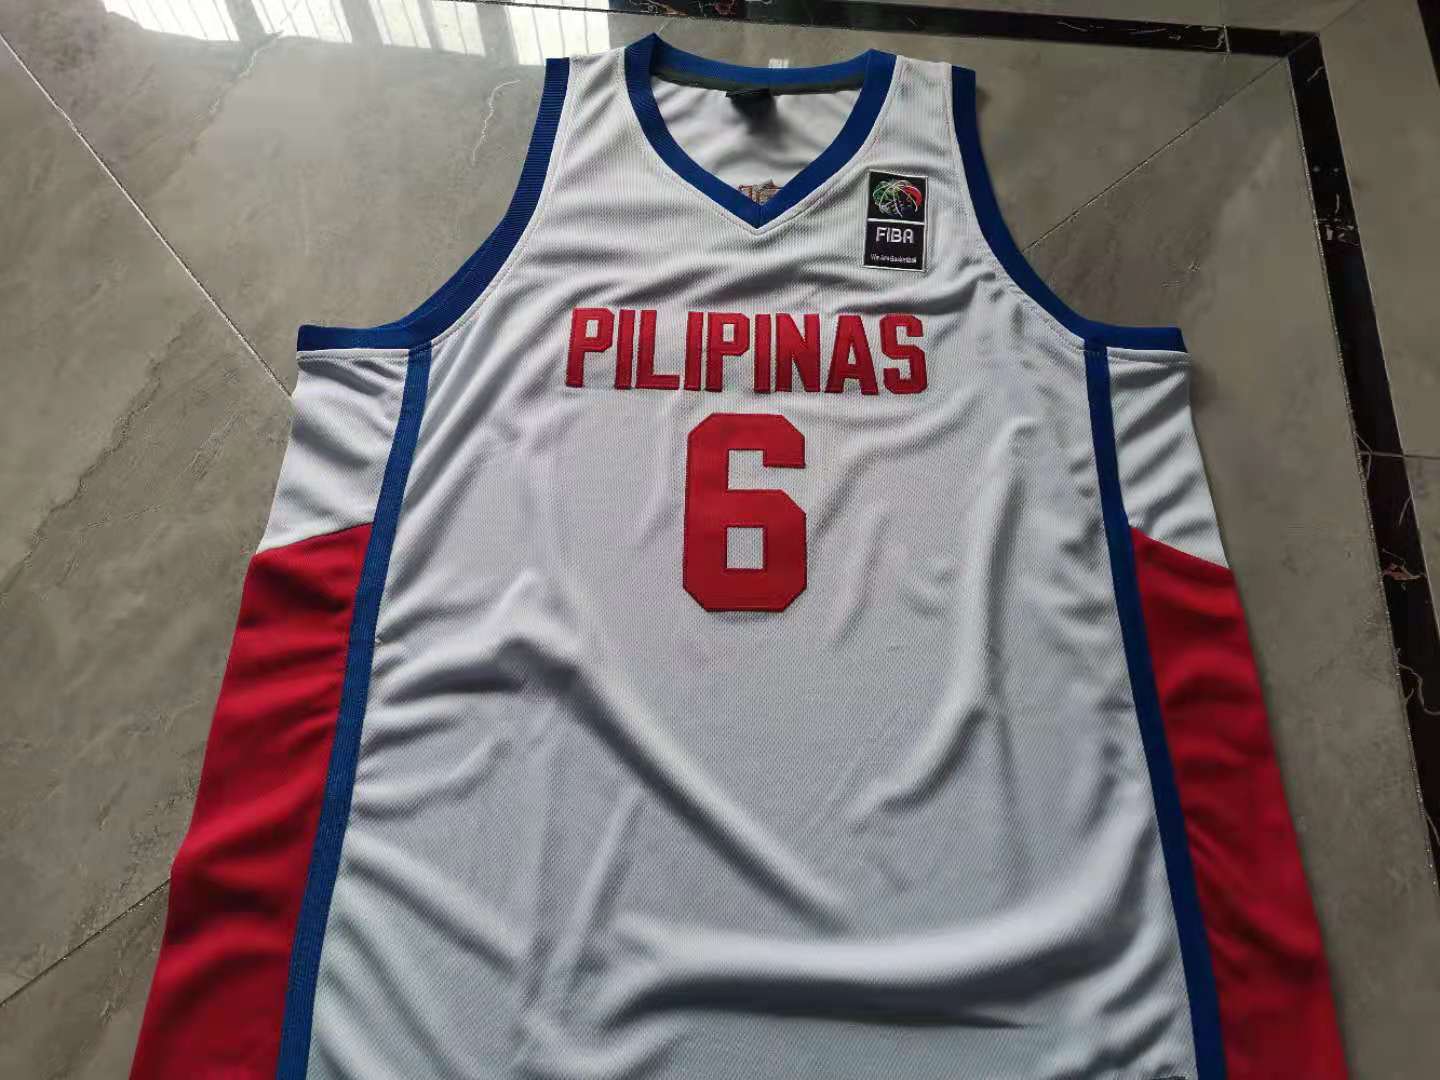 

rare Basketball Jersey Men Youth women Vintage Pilipinas Jord an Clarkson Philippines FIBA World Size S-5XL custom any name or number, White men s-4xl